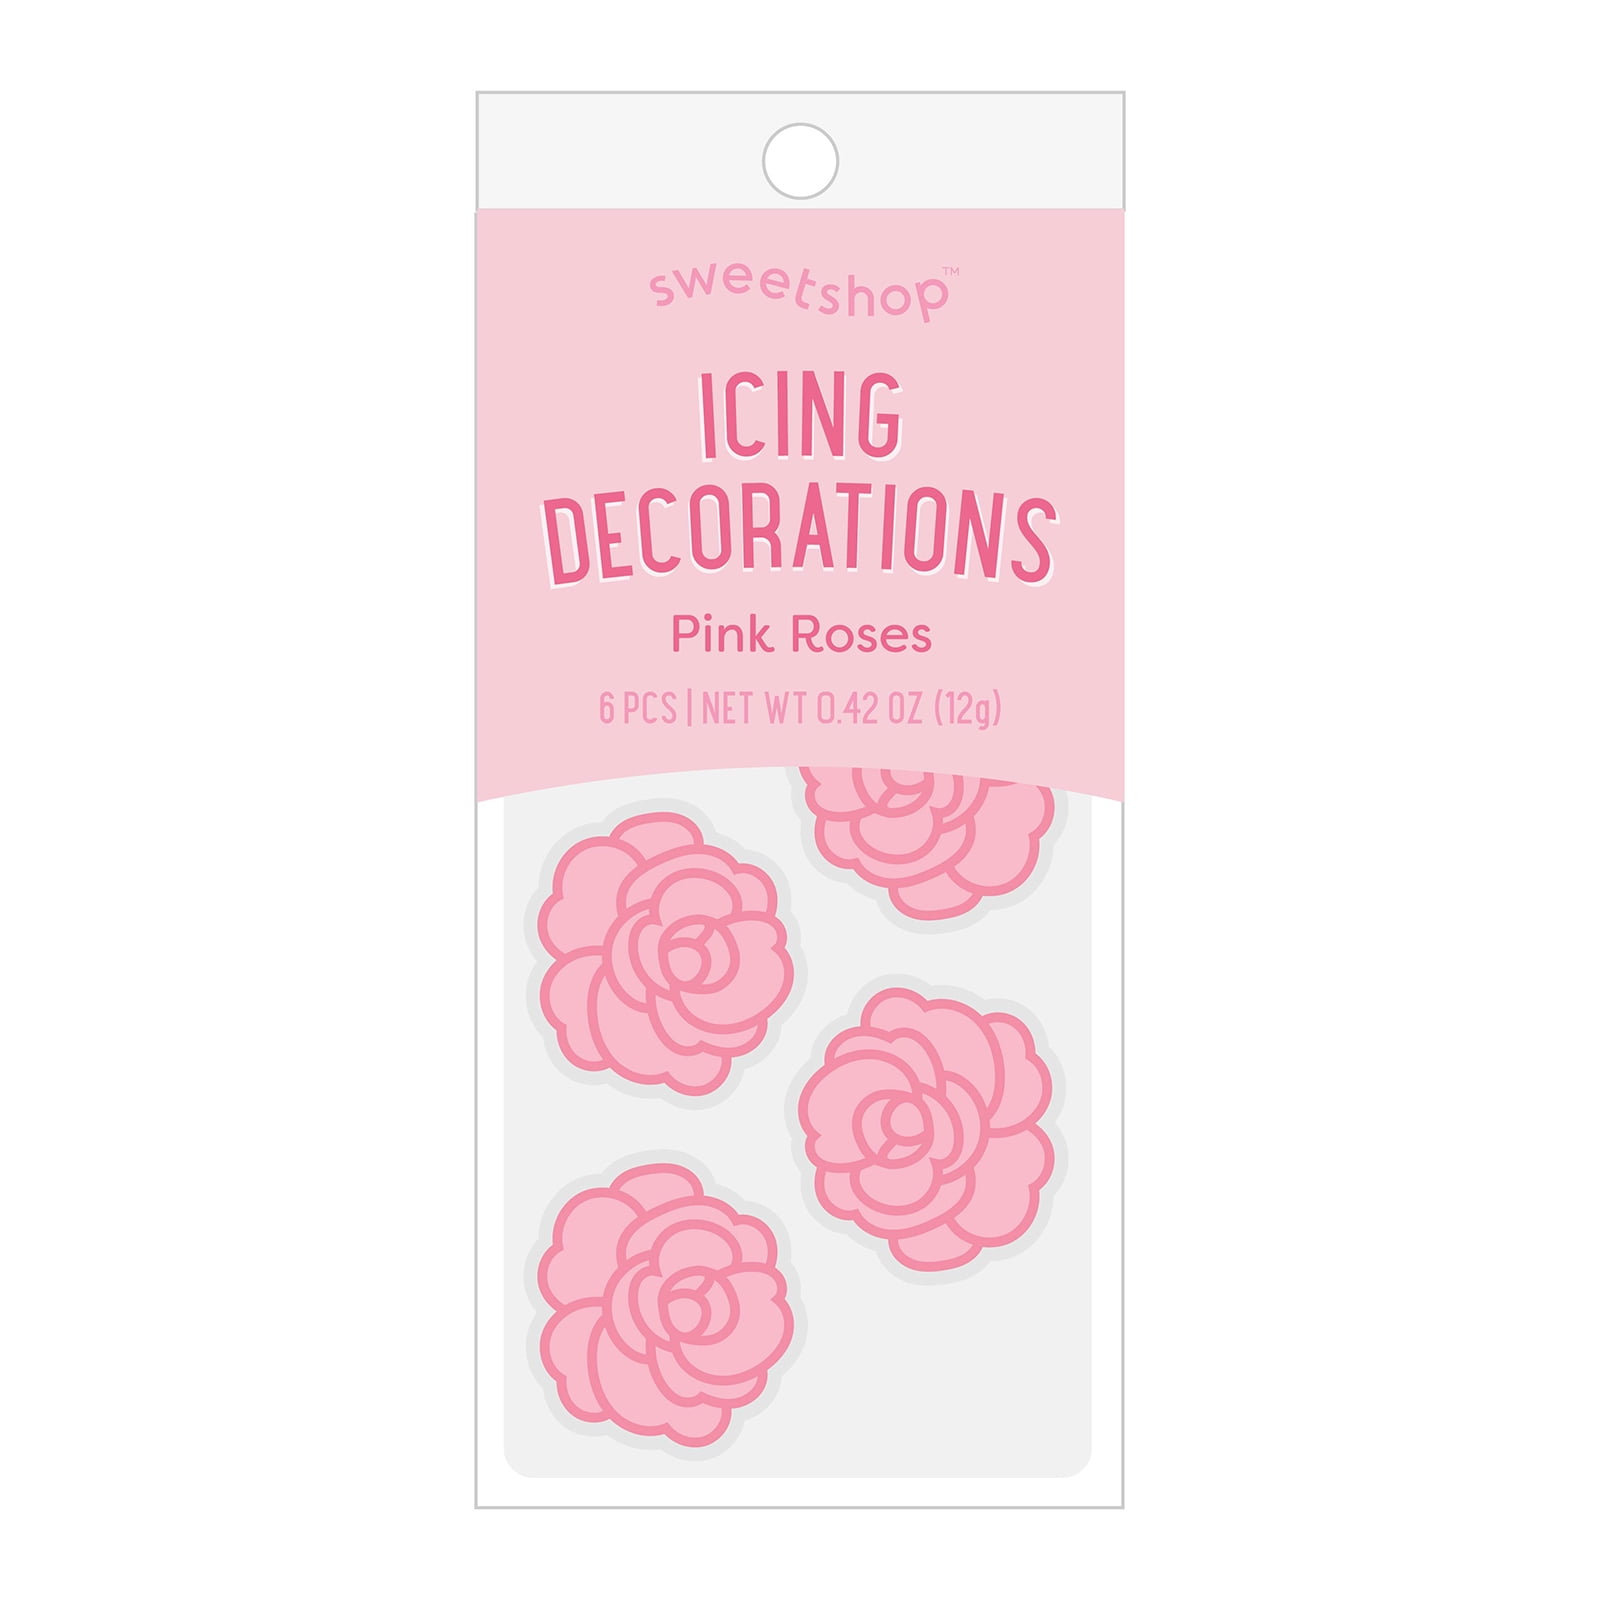 Sweetshop Pink Roses Icing Decorations - 6 Piece